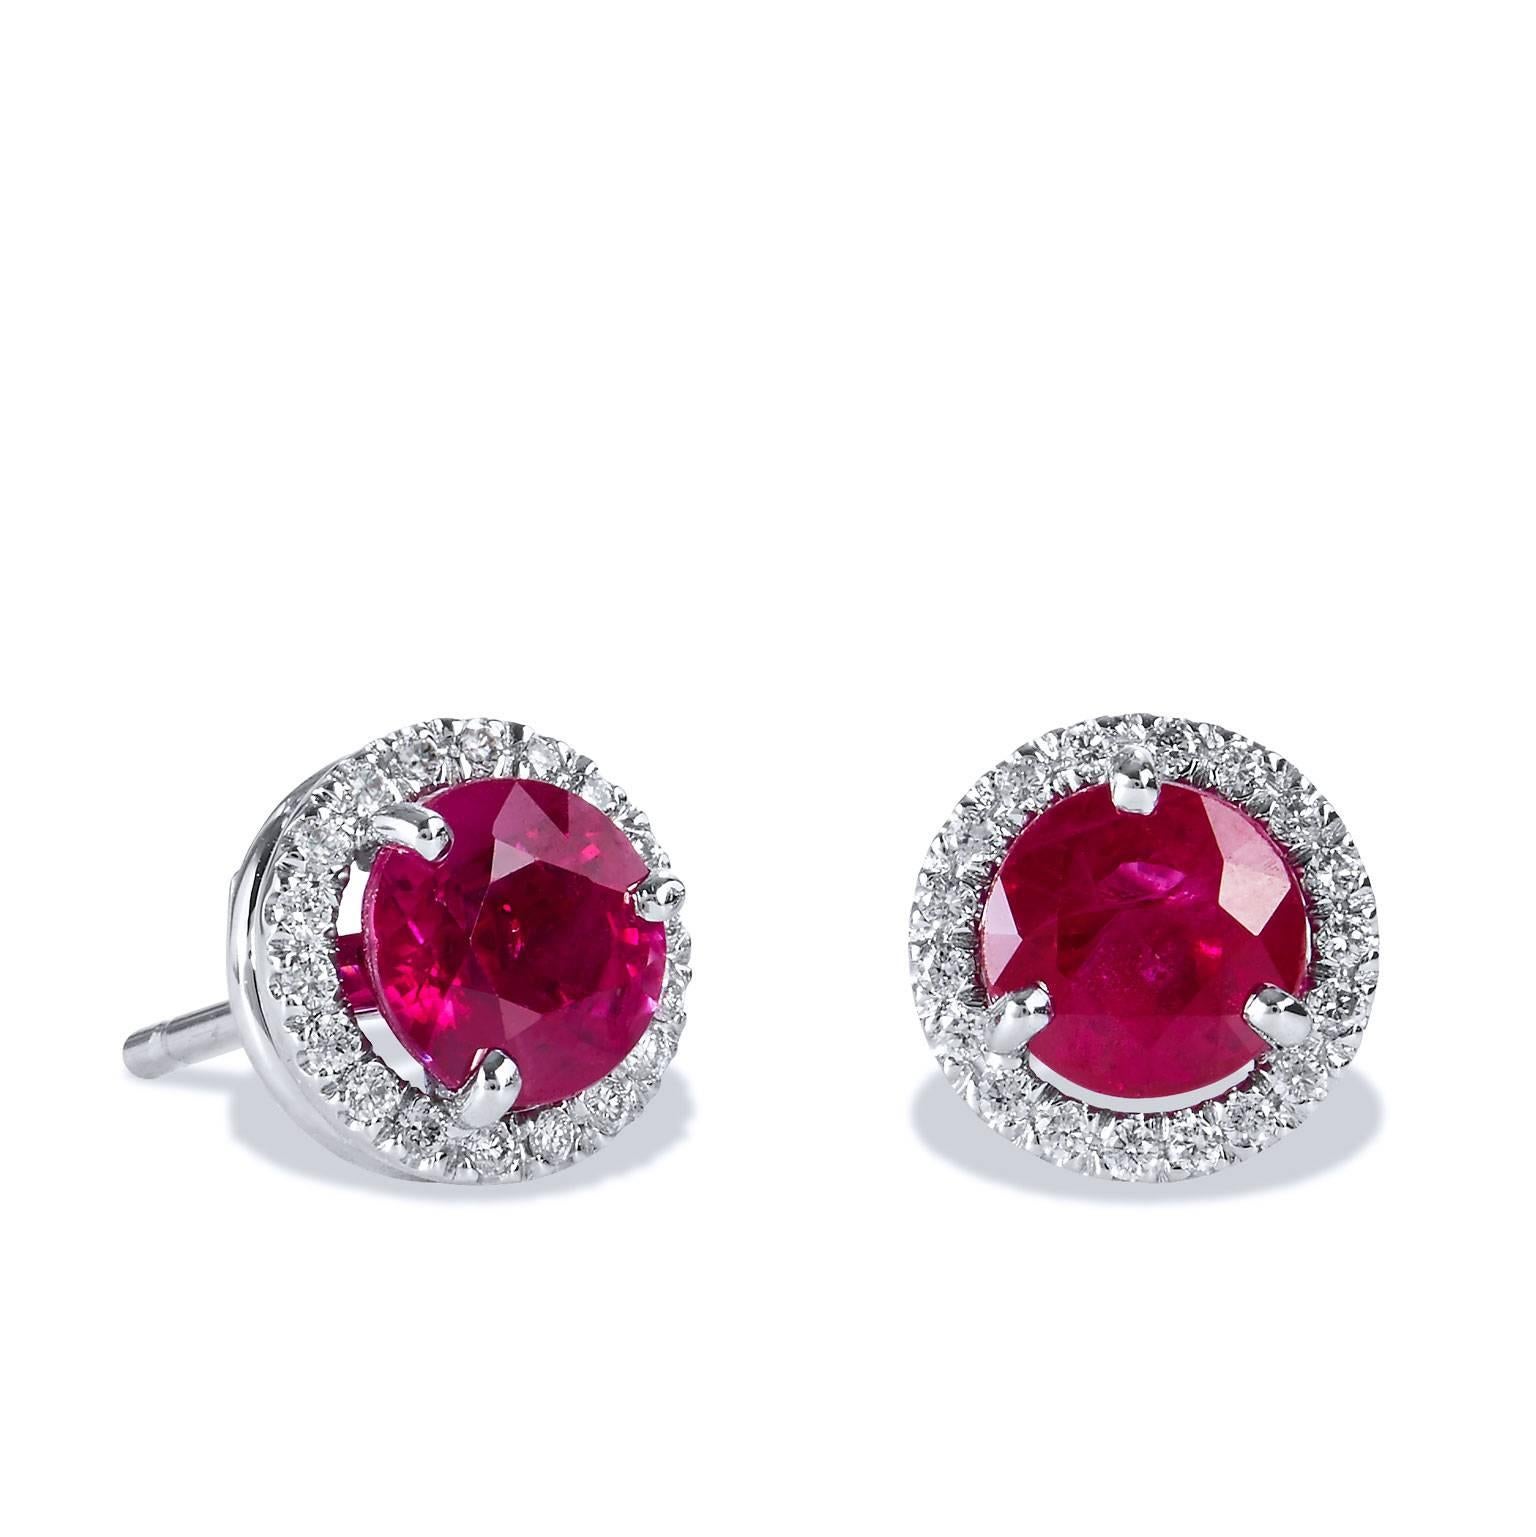 These impeccable 2.08 carat Burma rubies are embraced by 0.13 carat of pave-set diamond and fashioned from 18 karat white gold.  These handmade stud earrings are an original H & H design and are the perfect combination of beauty and